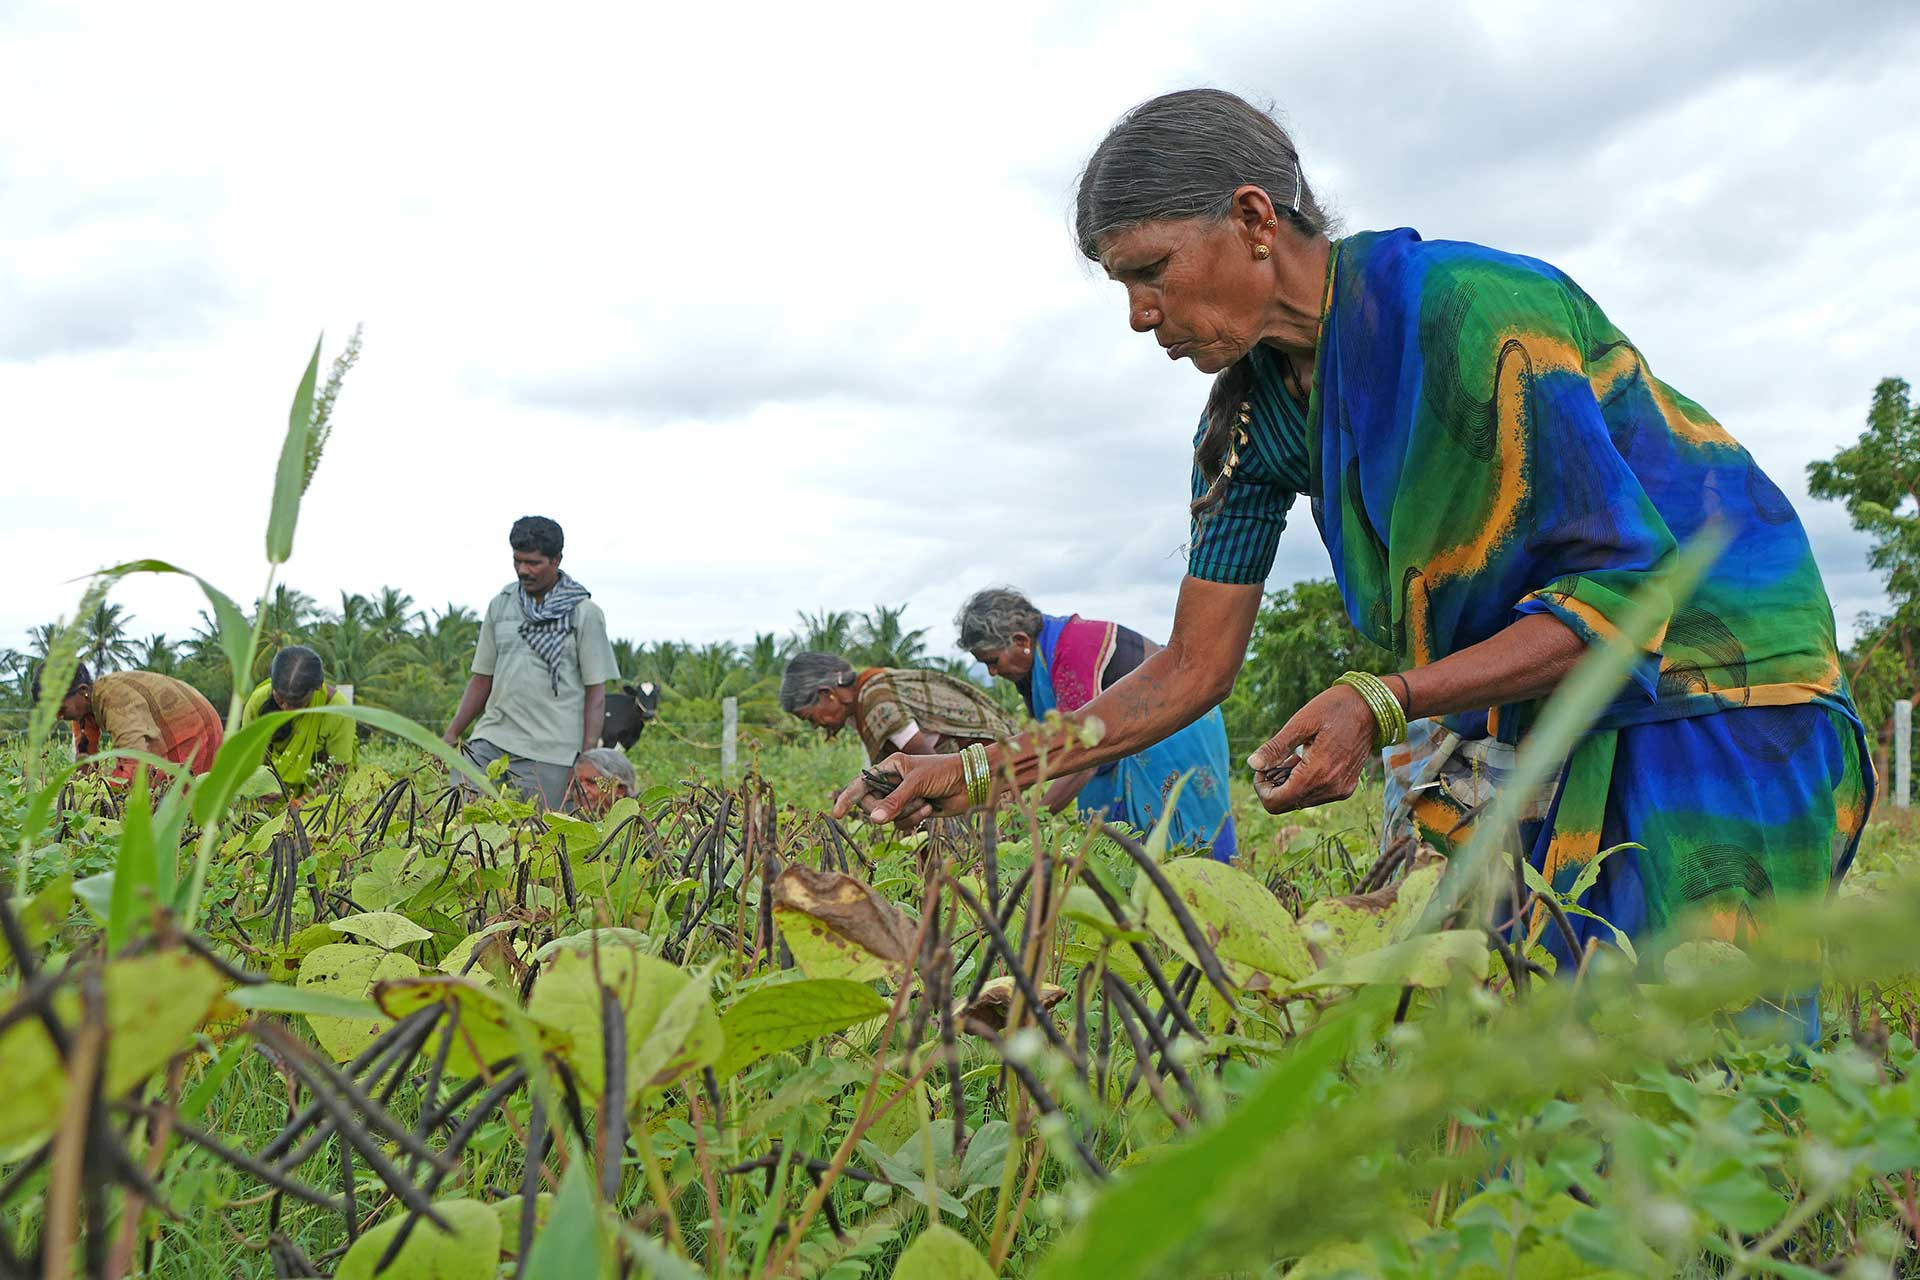 a woman in a sari harvests a crop in a field